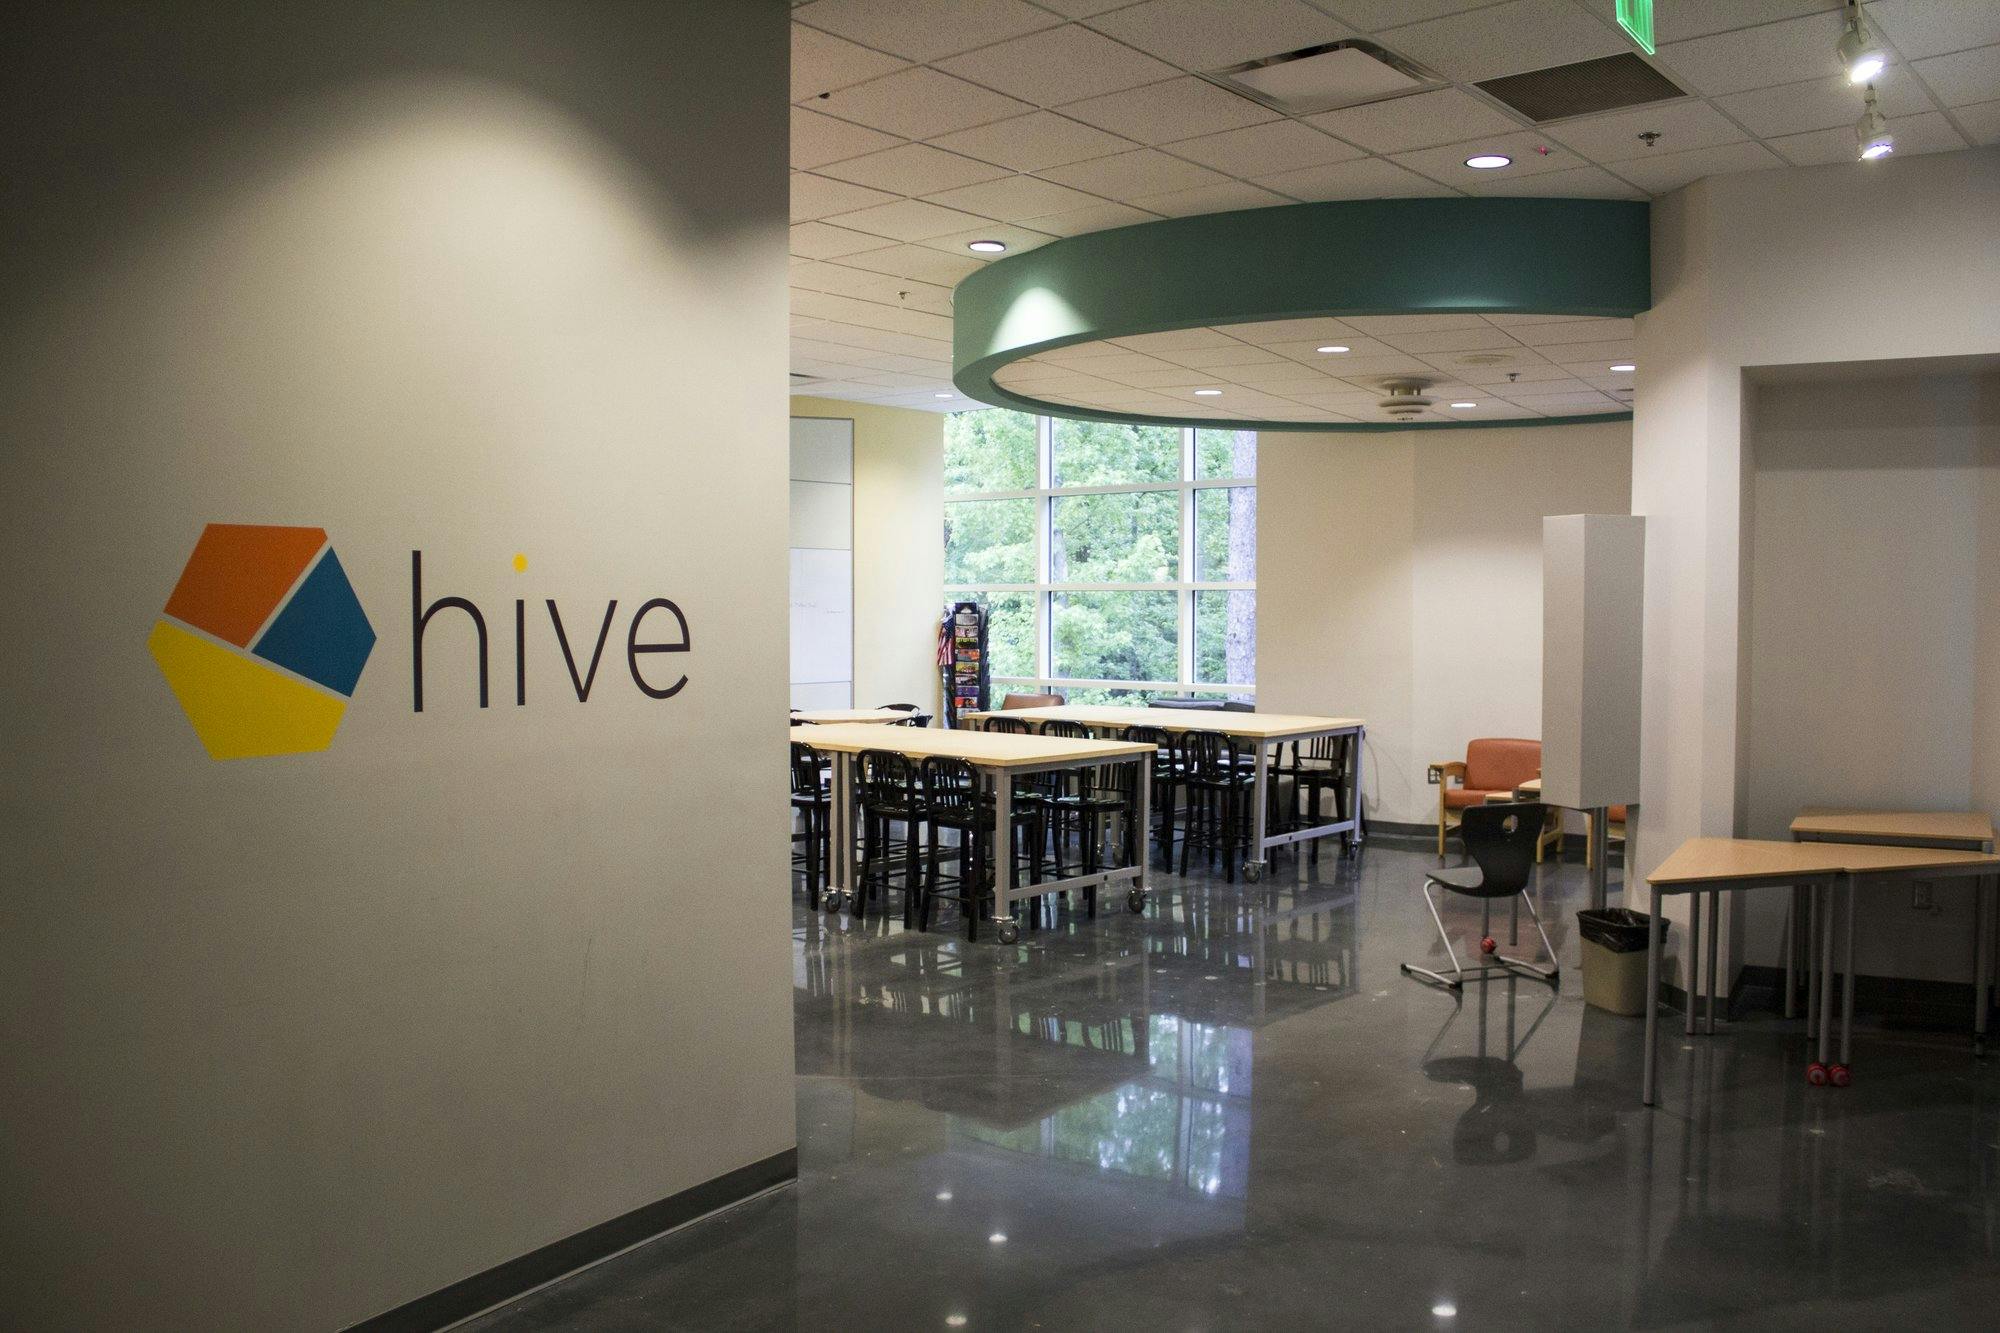 A logo with the word "hive" is printed on the wall at the front of an educational innovation space.